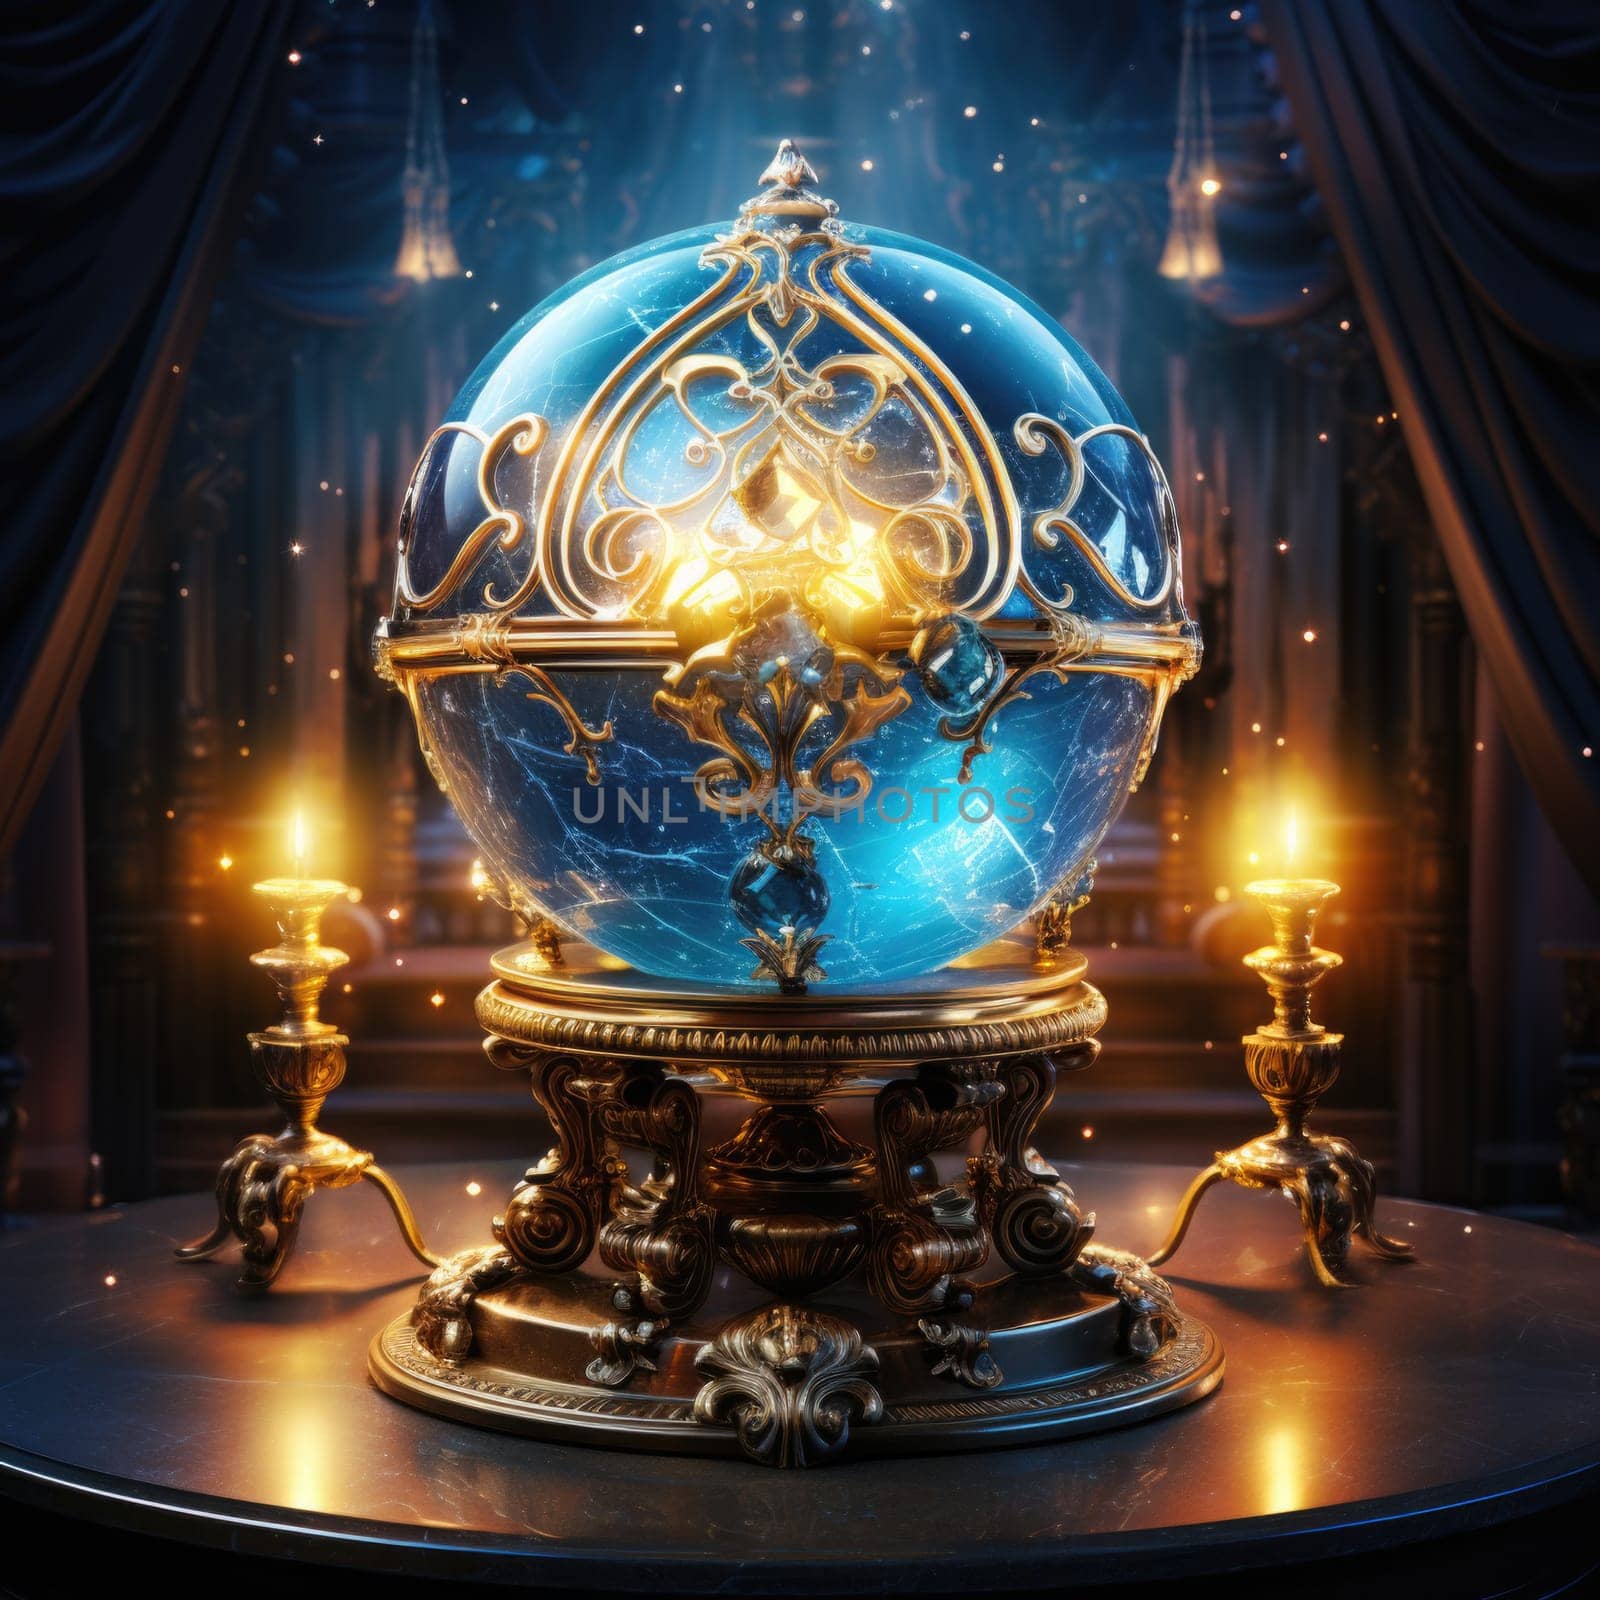 Crystal ball in an antique stand on a blurred background with candles. Magic ball for fortune telling.